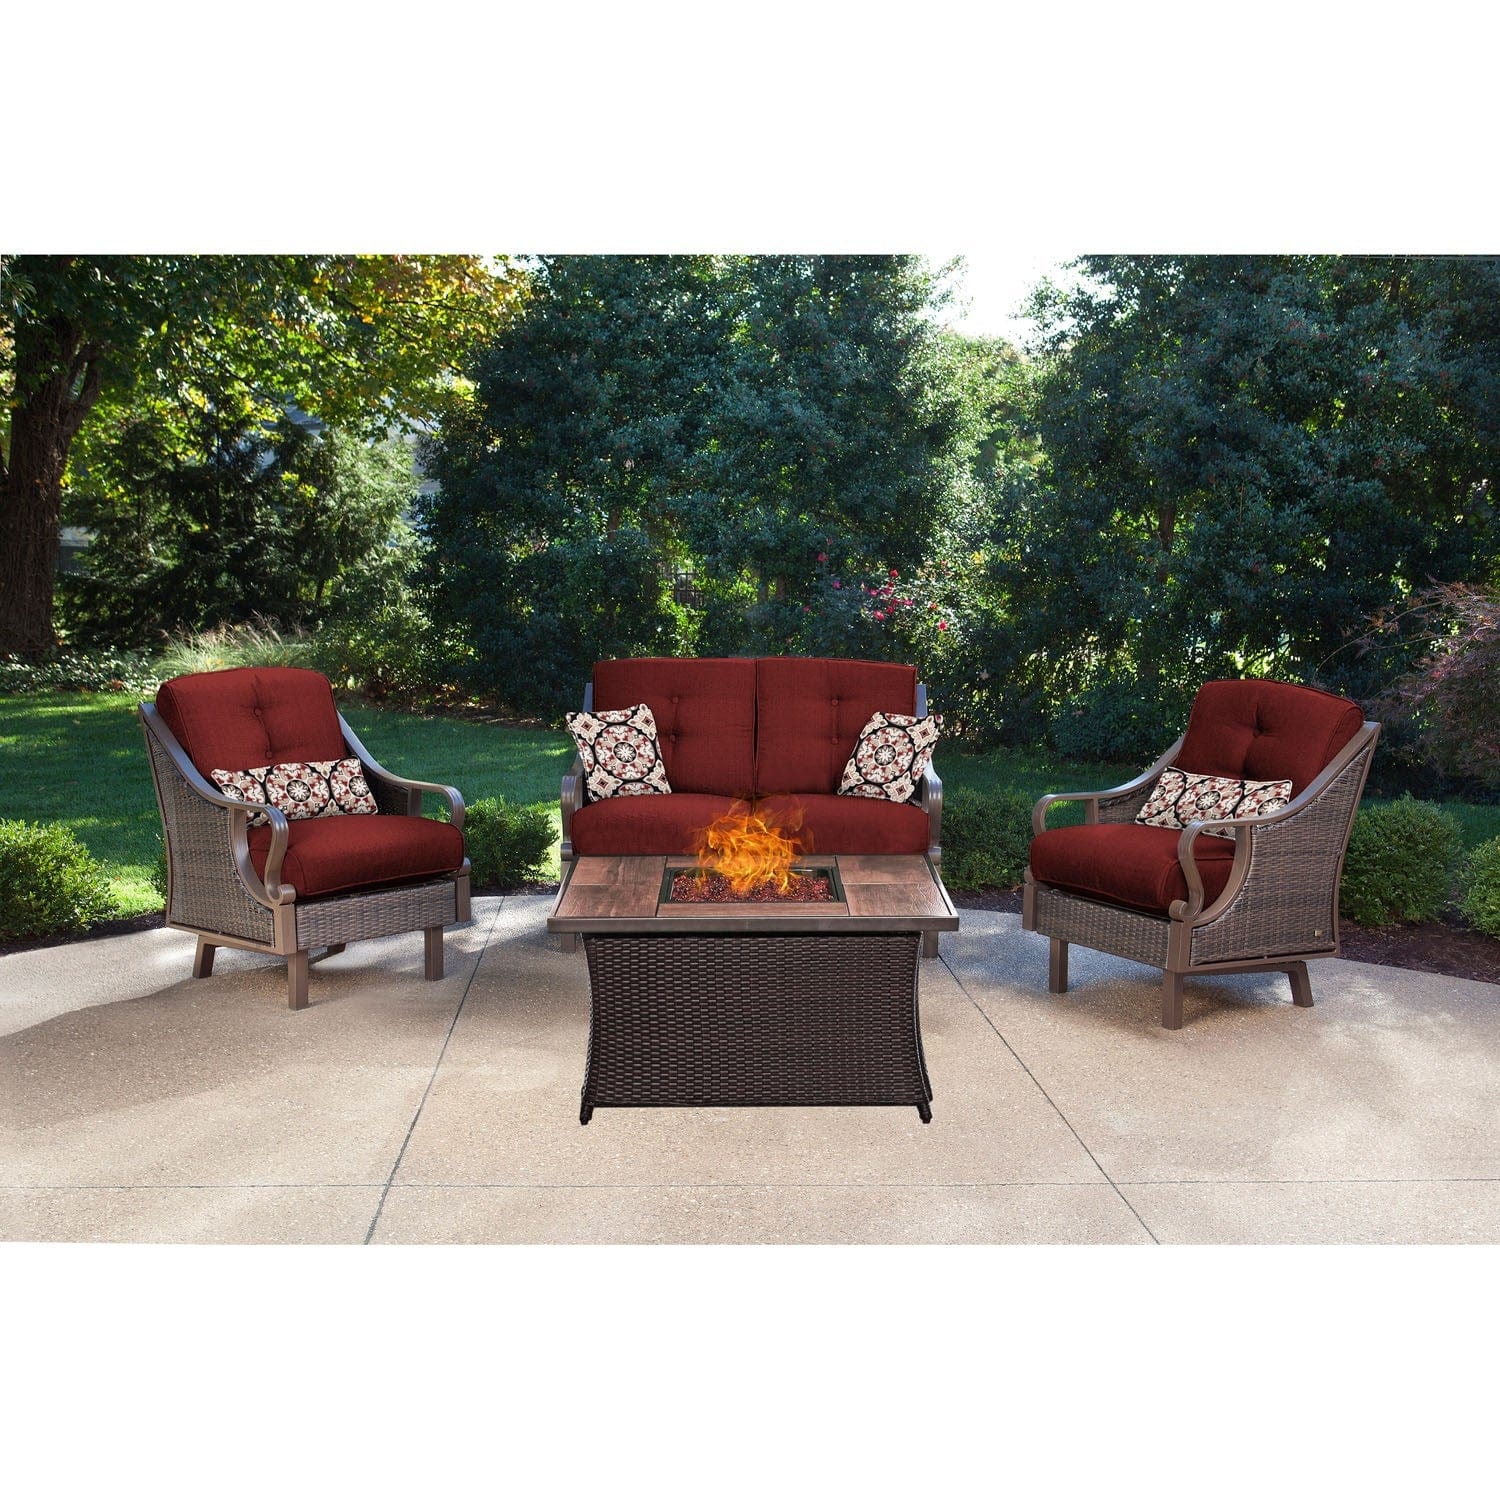 Hanover Fire Pit Chat Set Hanover - Ventura 4-Piece Fire Pit Chat Set | with Wood Grain Tile Top | Brown/Red | VEN4PCFP-RED-WG